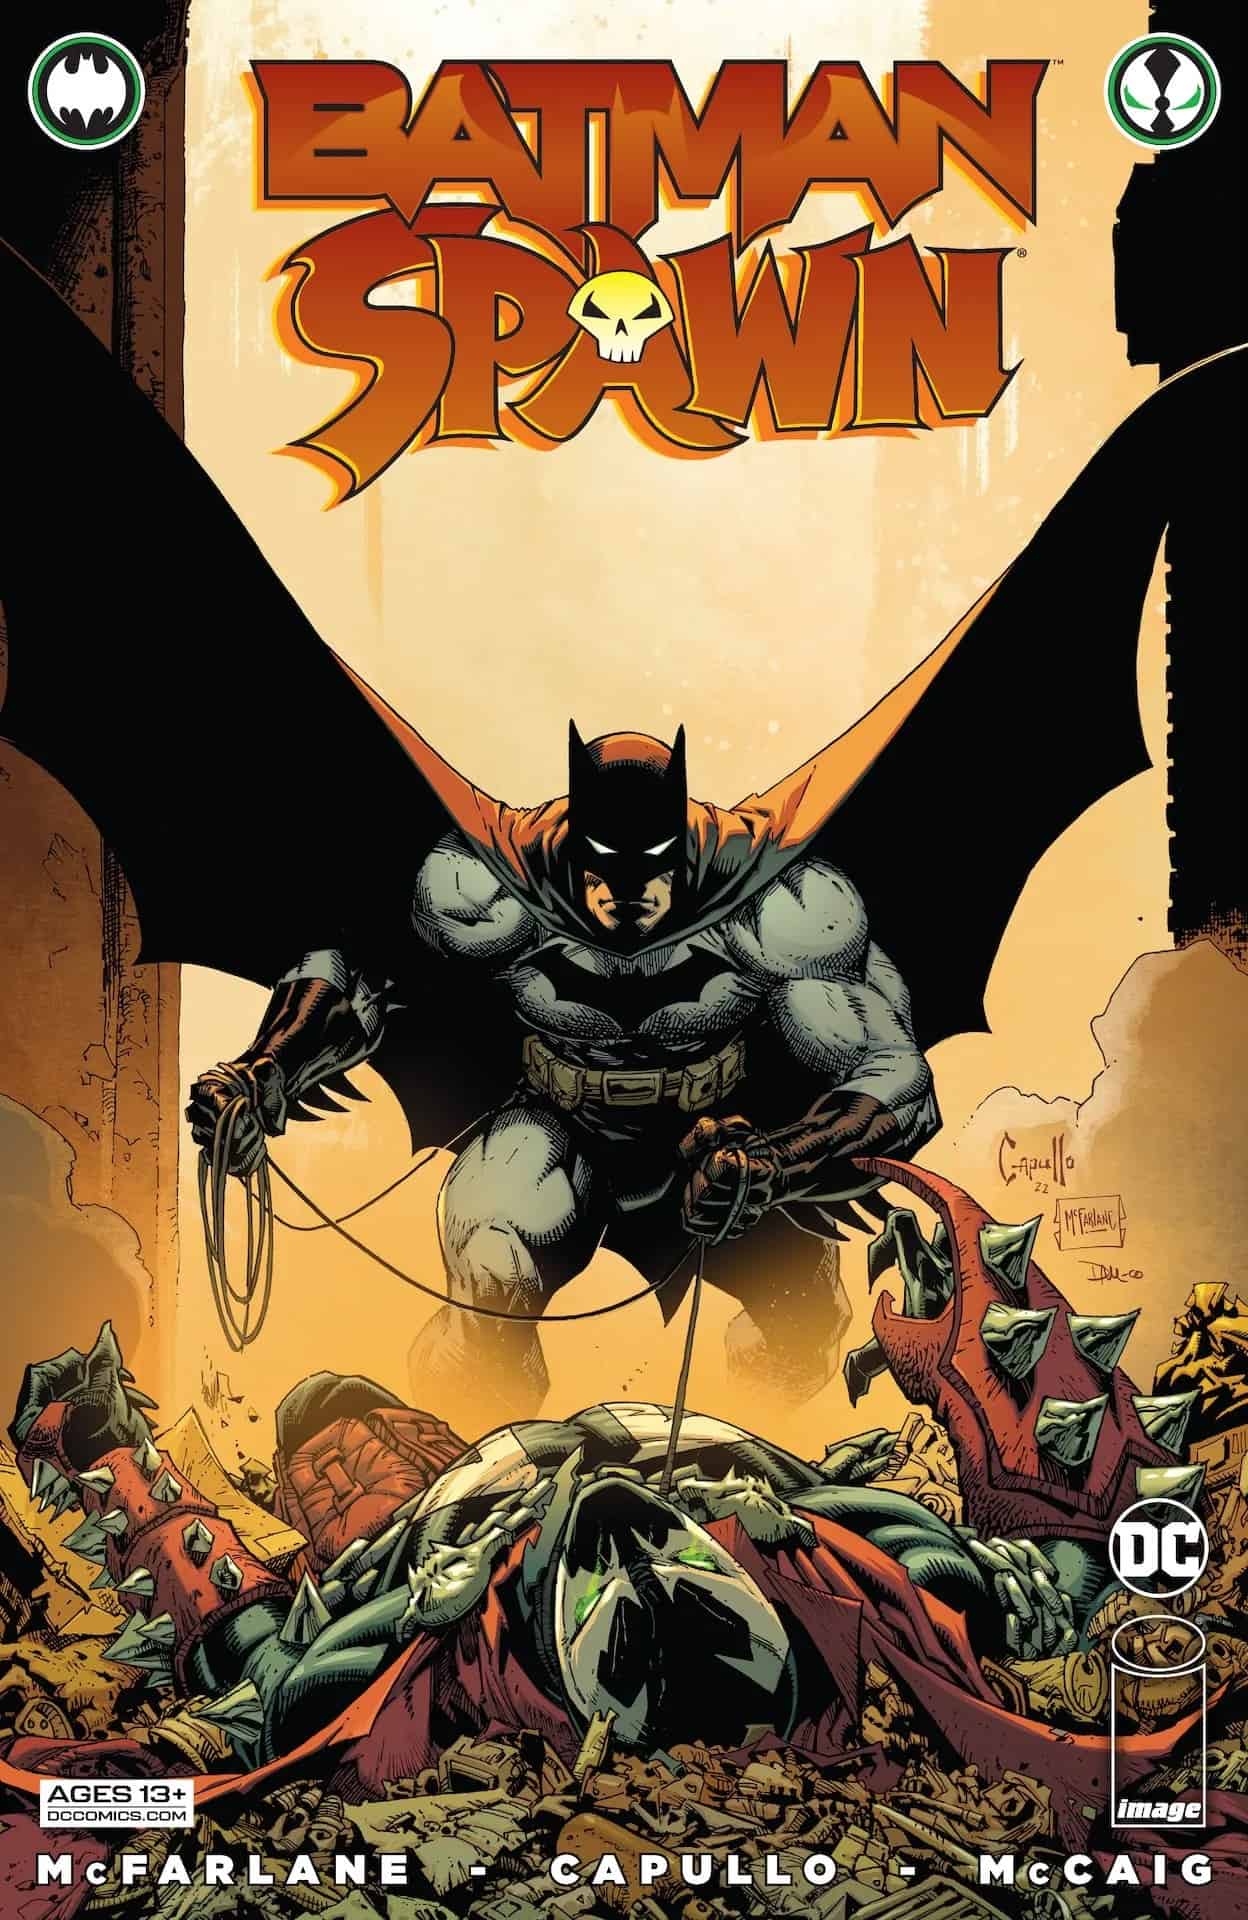 BATMAN/SPAWN #1: Reign in Blood (Spoiler-Free Review) - Comic Watch